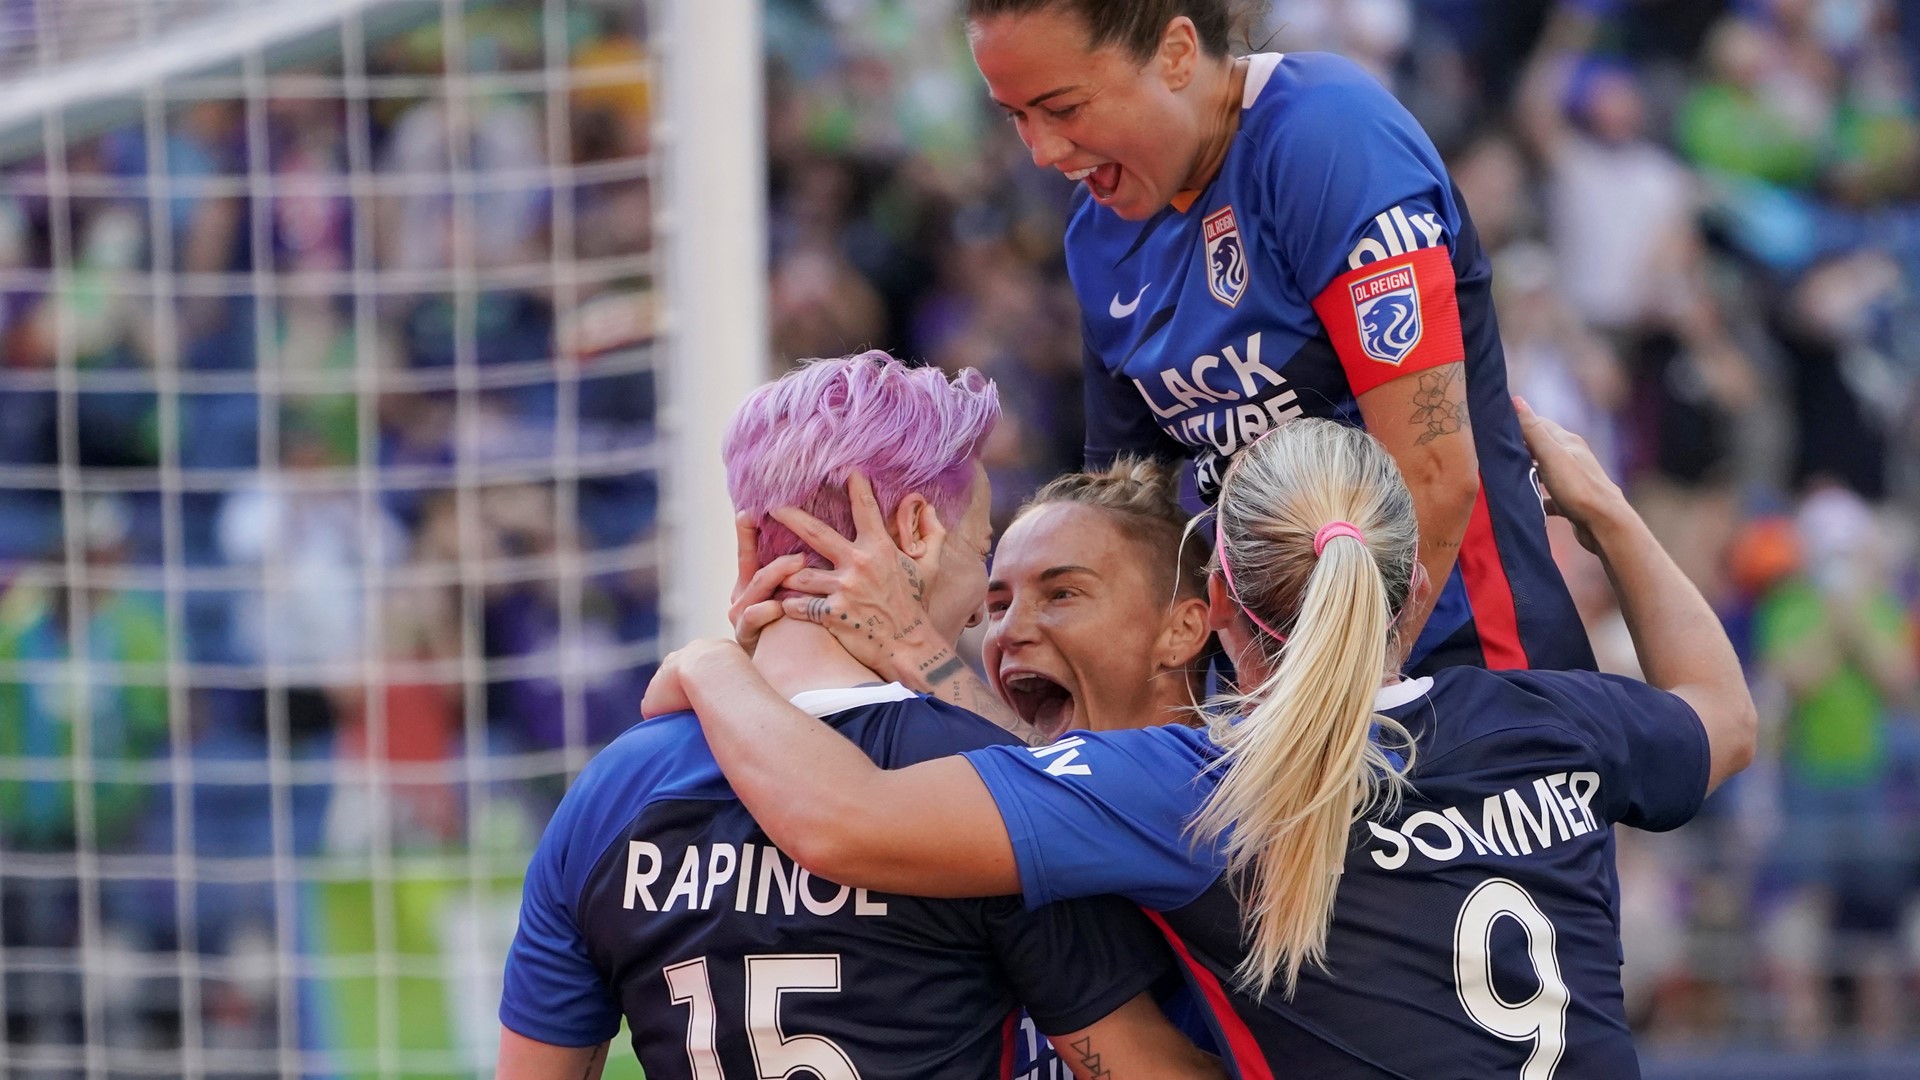 NWSL players to get higher salaries, insurance under 1st CBA